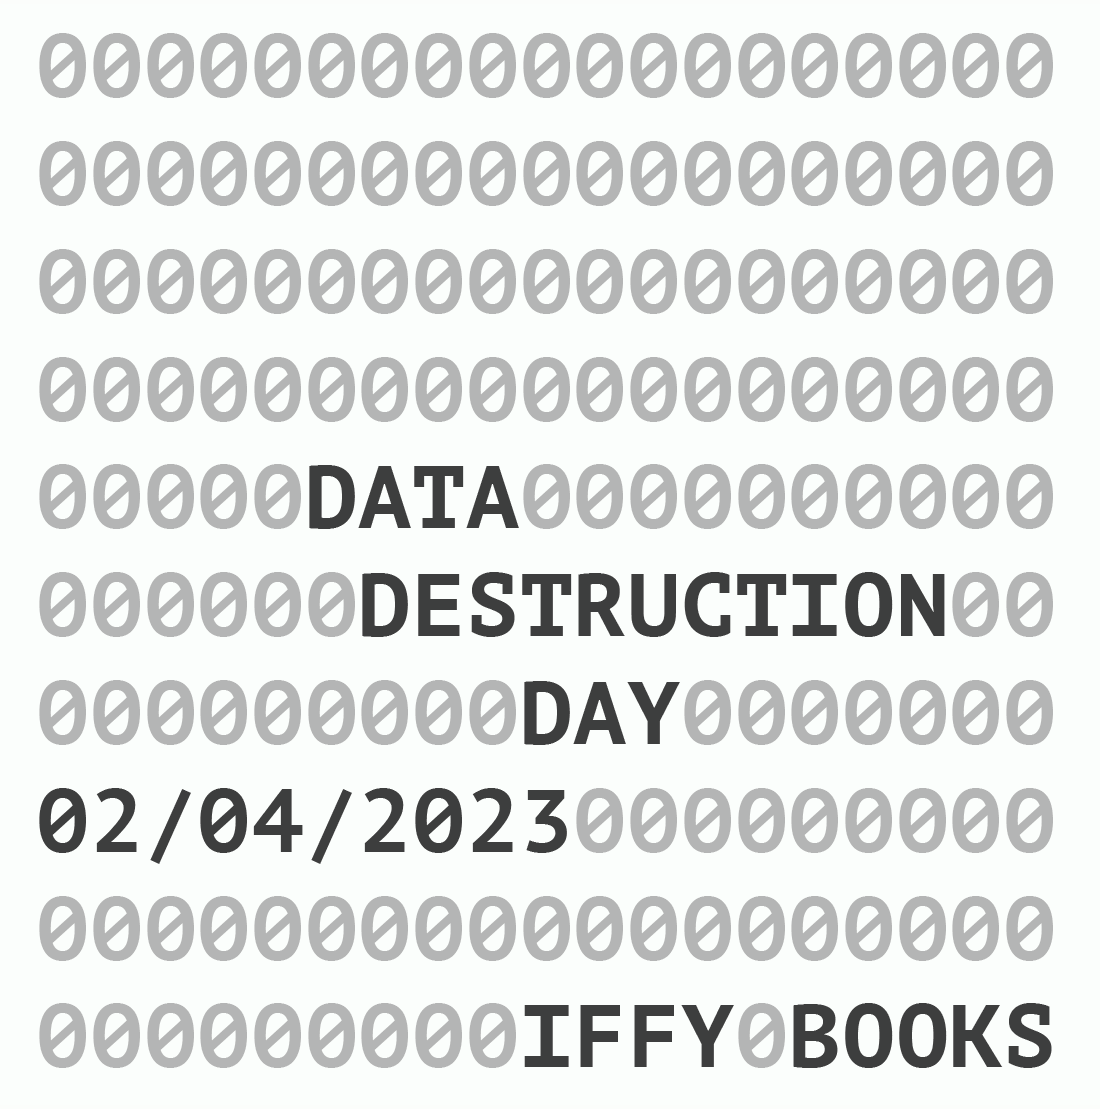 A square grid of gray zeros with the following text interspersed in black: DATA DESTRUCTION DAY 02/04/2023 IFFY BOOKS